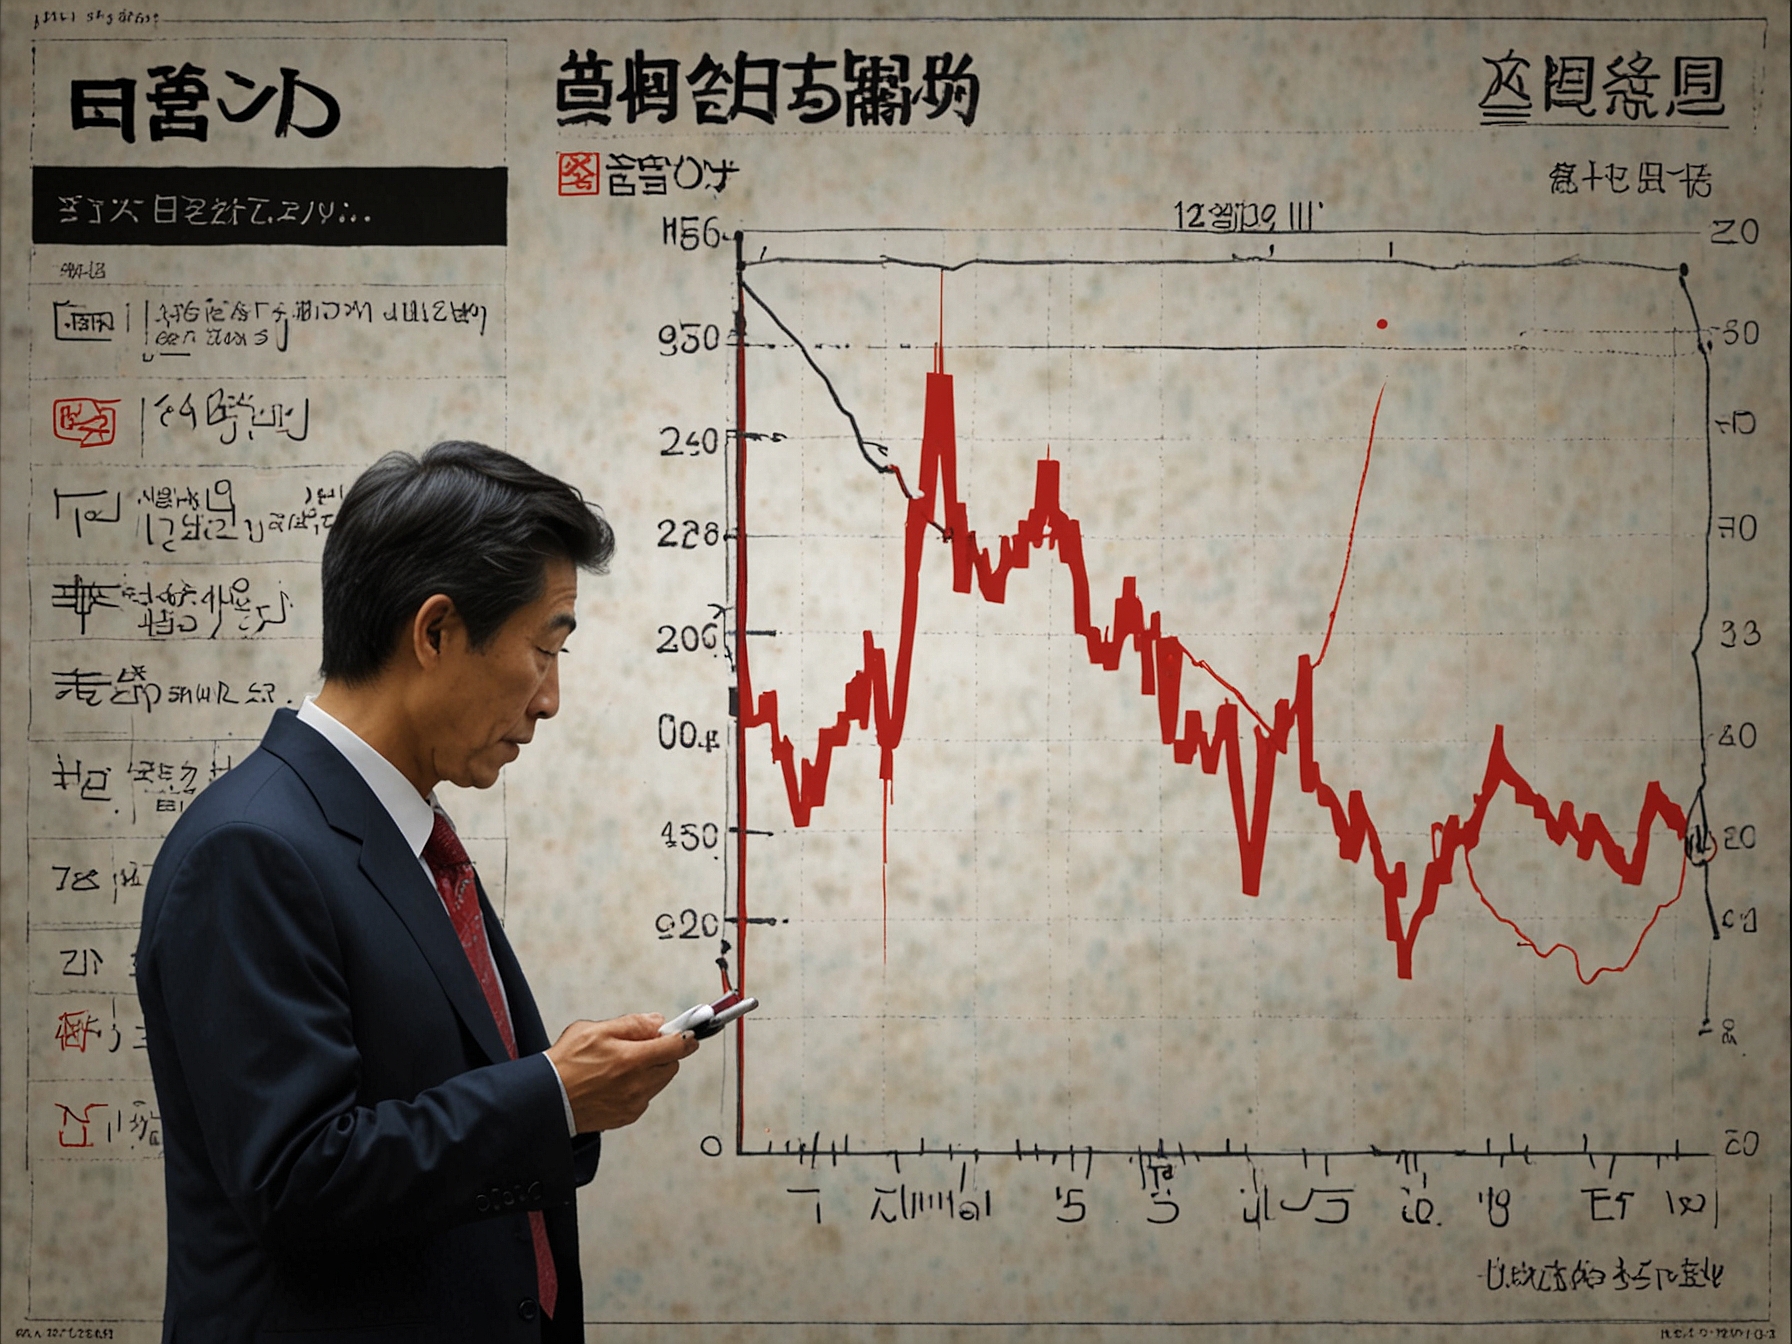 A graph illustrating the 2.9% decline in Japan's core machinery orders for April, showing monthly fluctuations over the last few months, with analysts predicting a recovery in the near term.